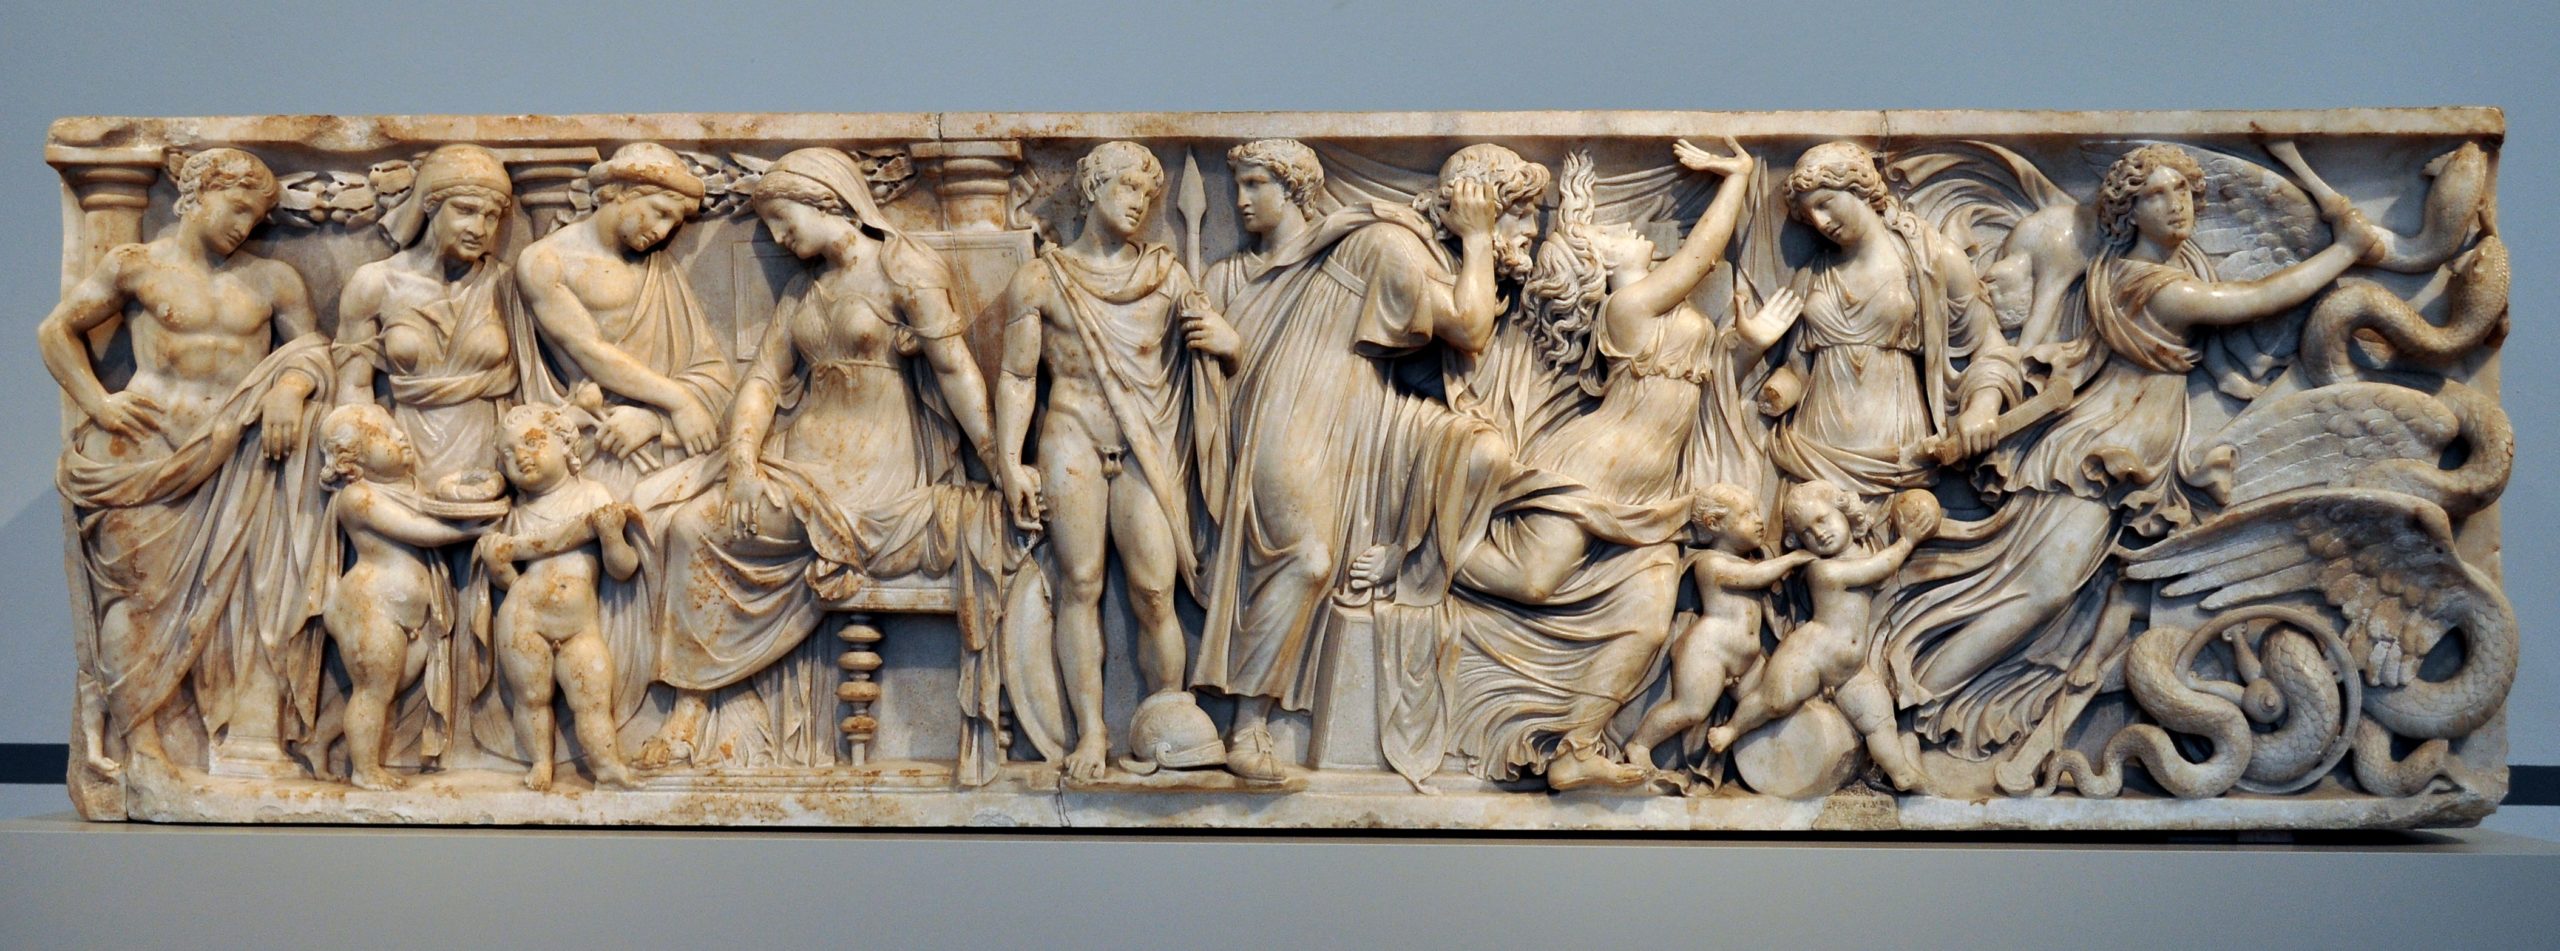 On the far left, are Medea, Jason, and their two children. The next section depicts the courtship of Jason and Creusa, followed by Jason and Creusa in suffering after Medea poisoned them. On the far right is Medea, escaping on her chariot drawn by two winged serpentine dragons.